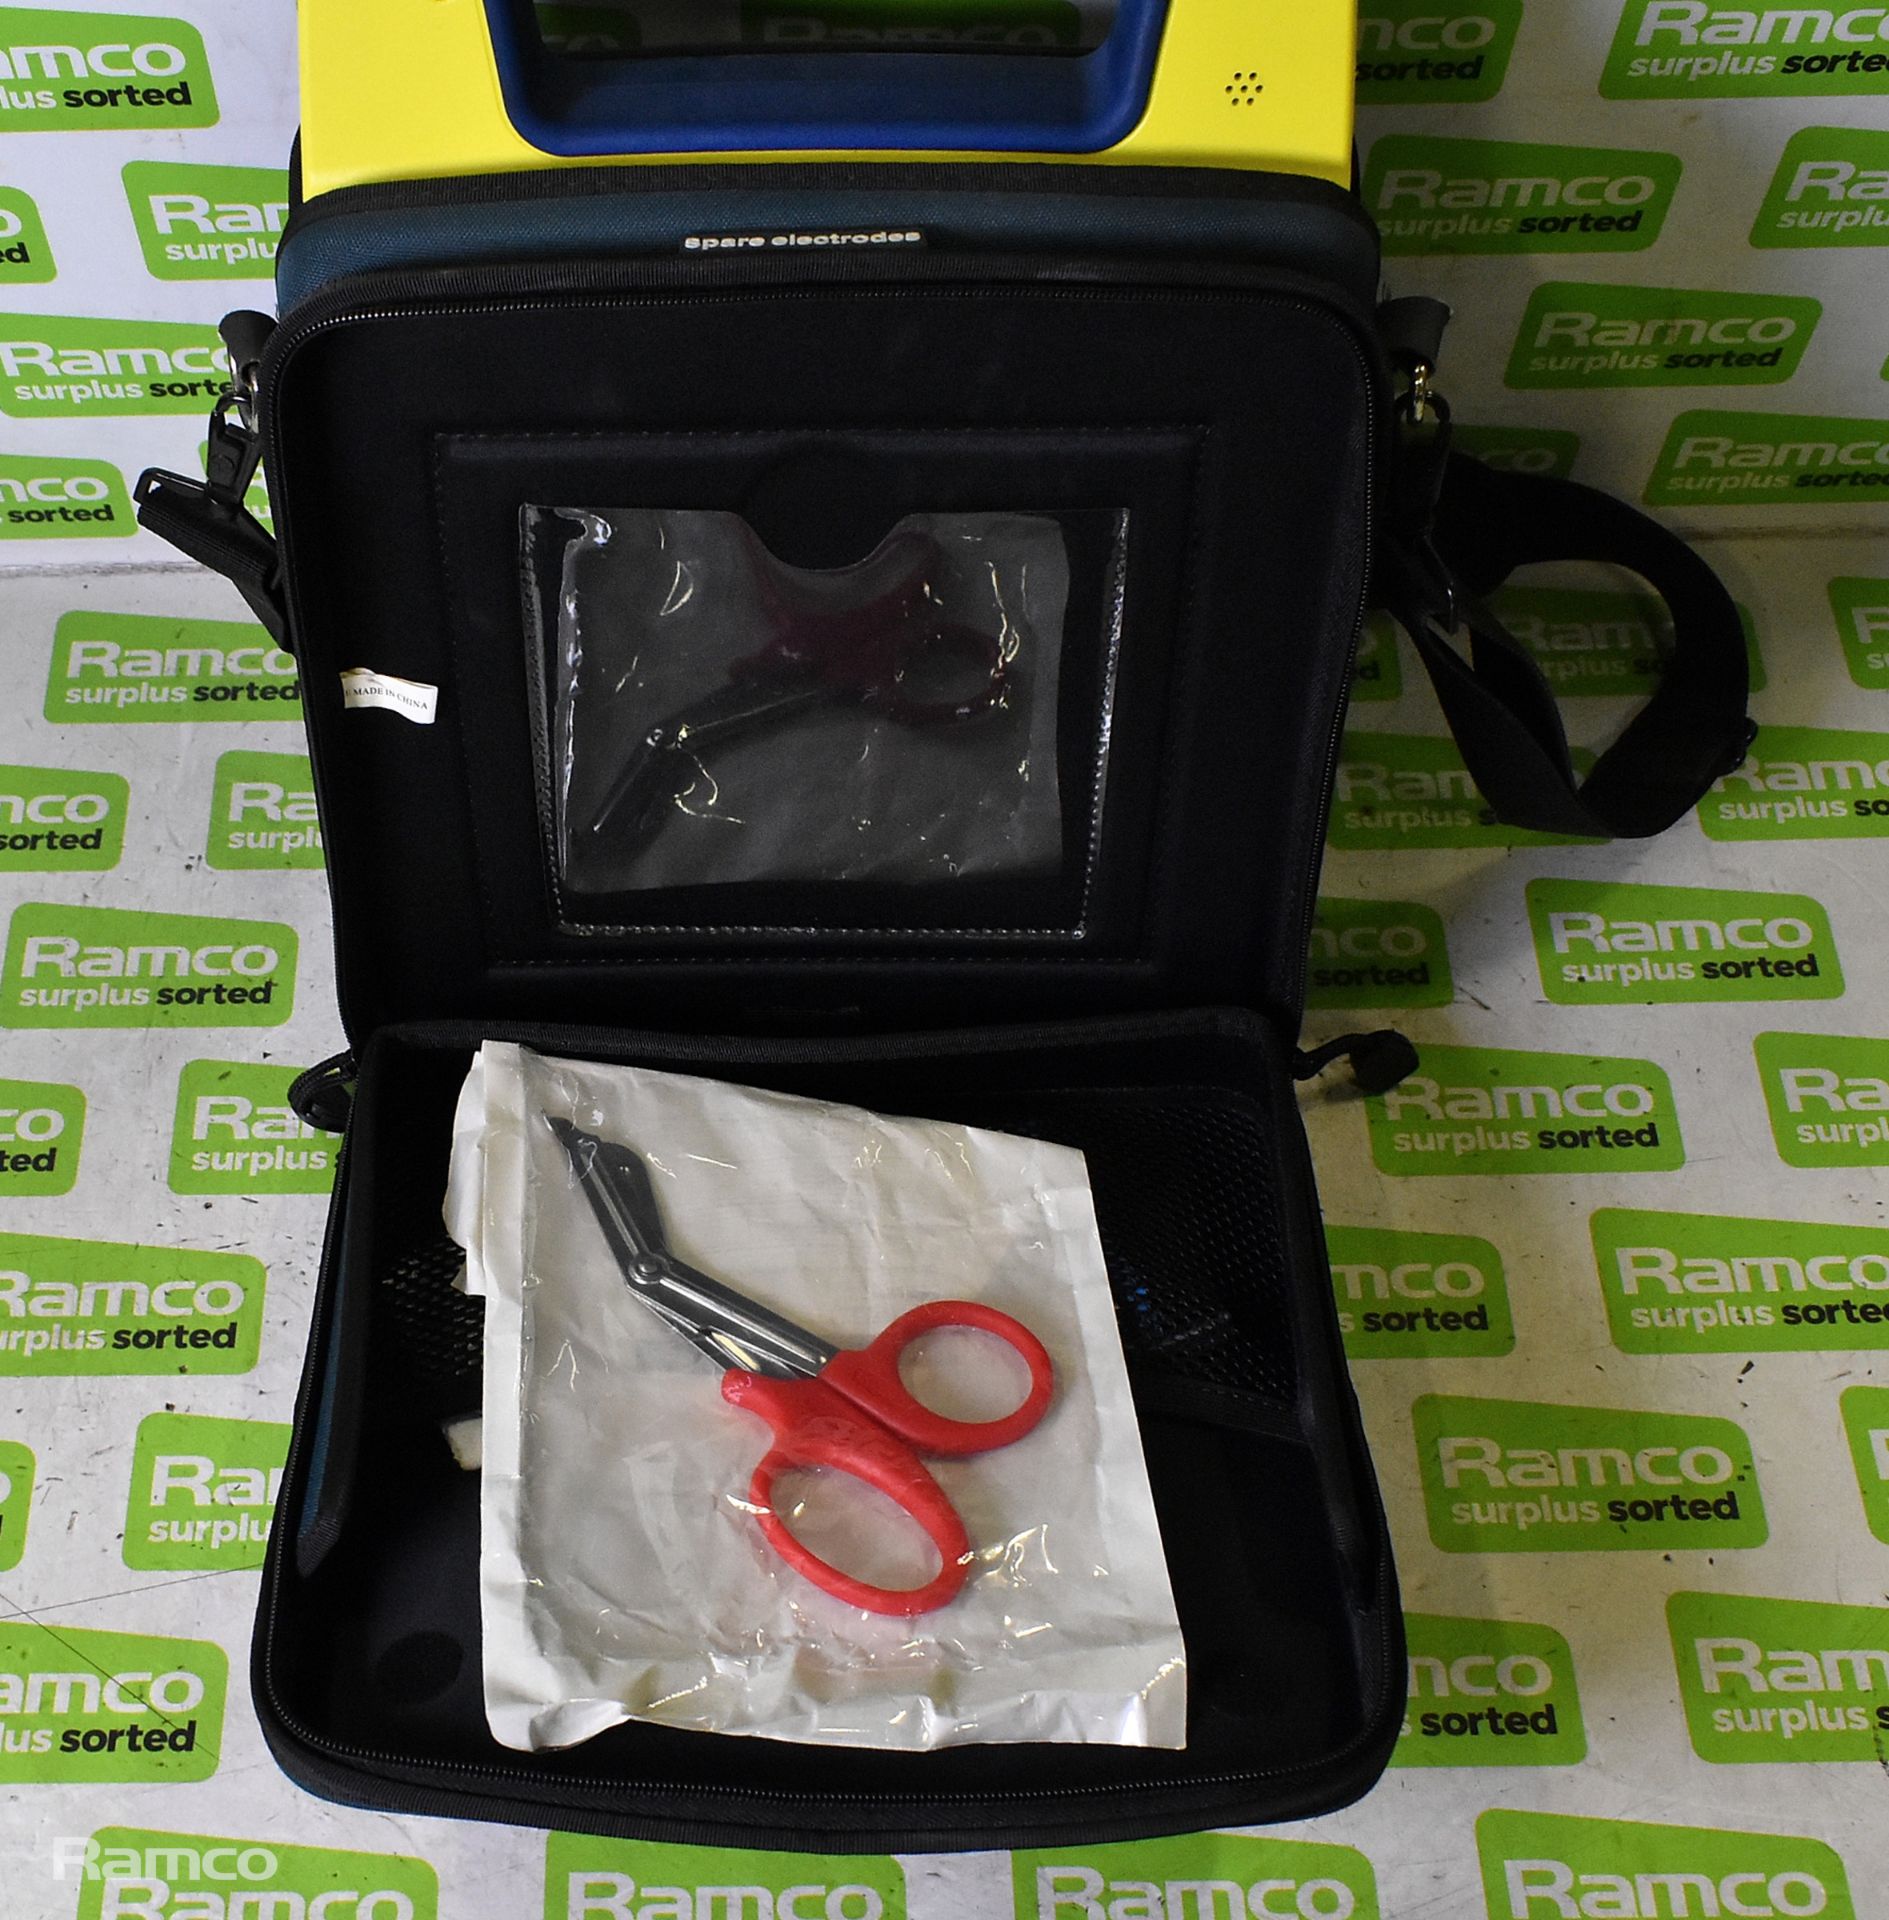 3x Cardiac Science G3 AED defibrillator - in carry case (REQUIRES CALIBRATION) - Image 7 of 15